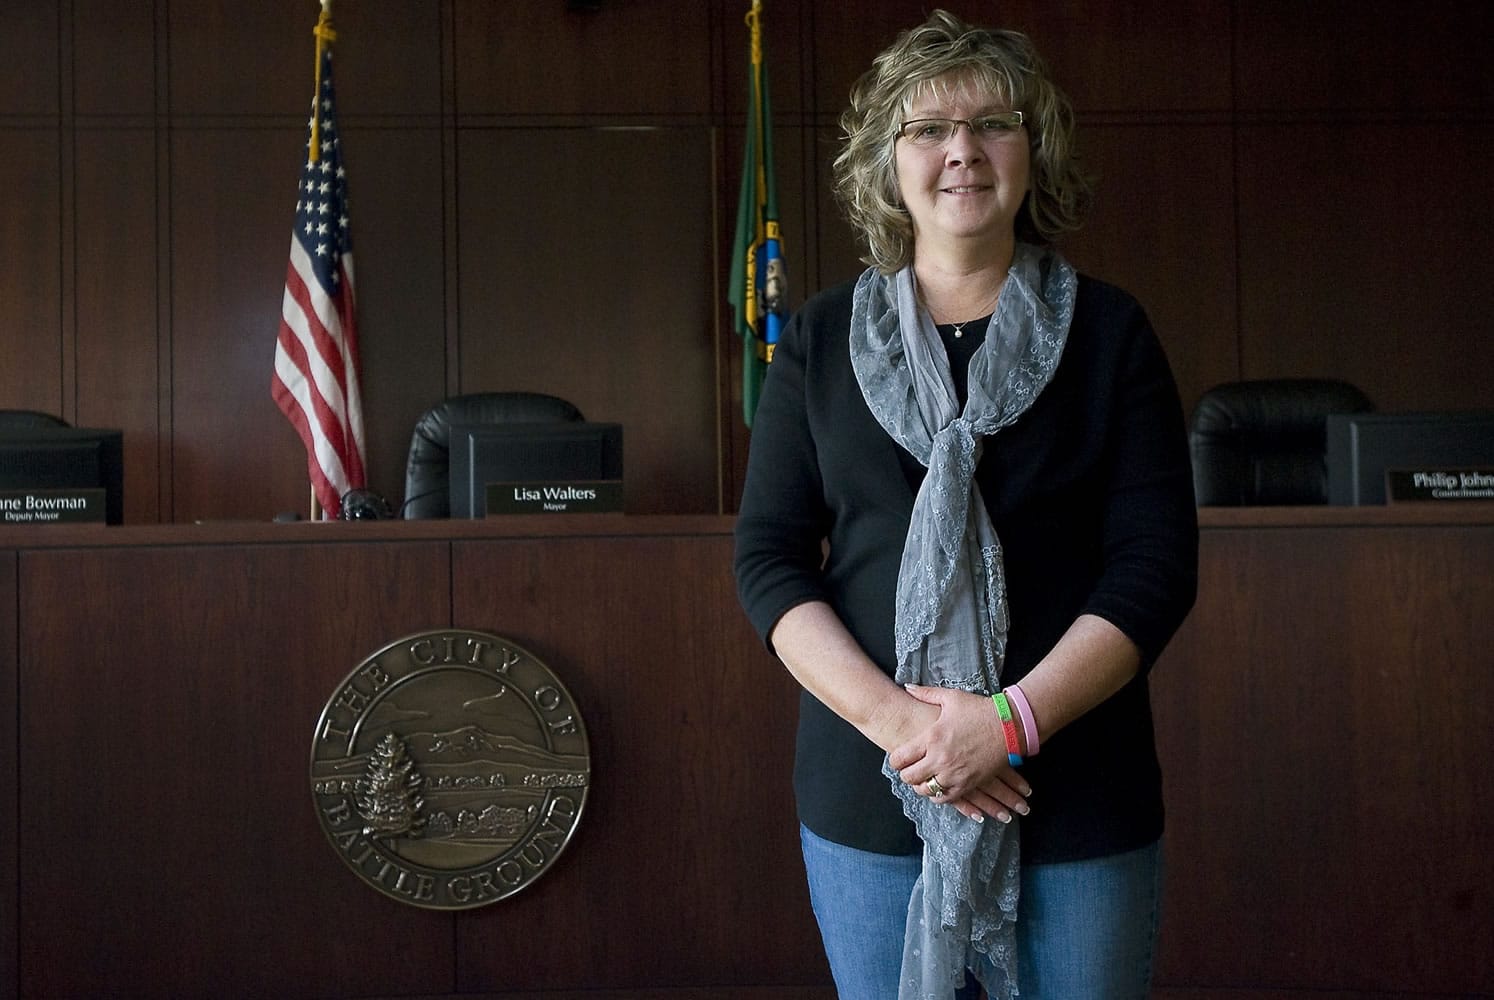 After more than a decade on the City Council, Lisa Walters recently became Battle Ground's first female mayor.